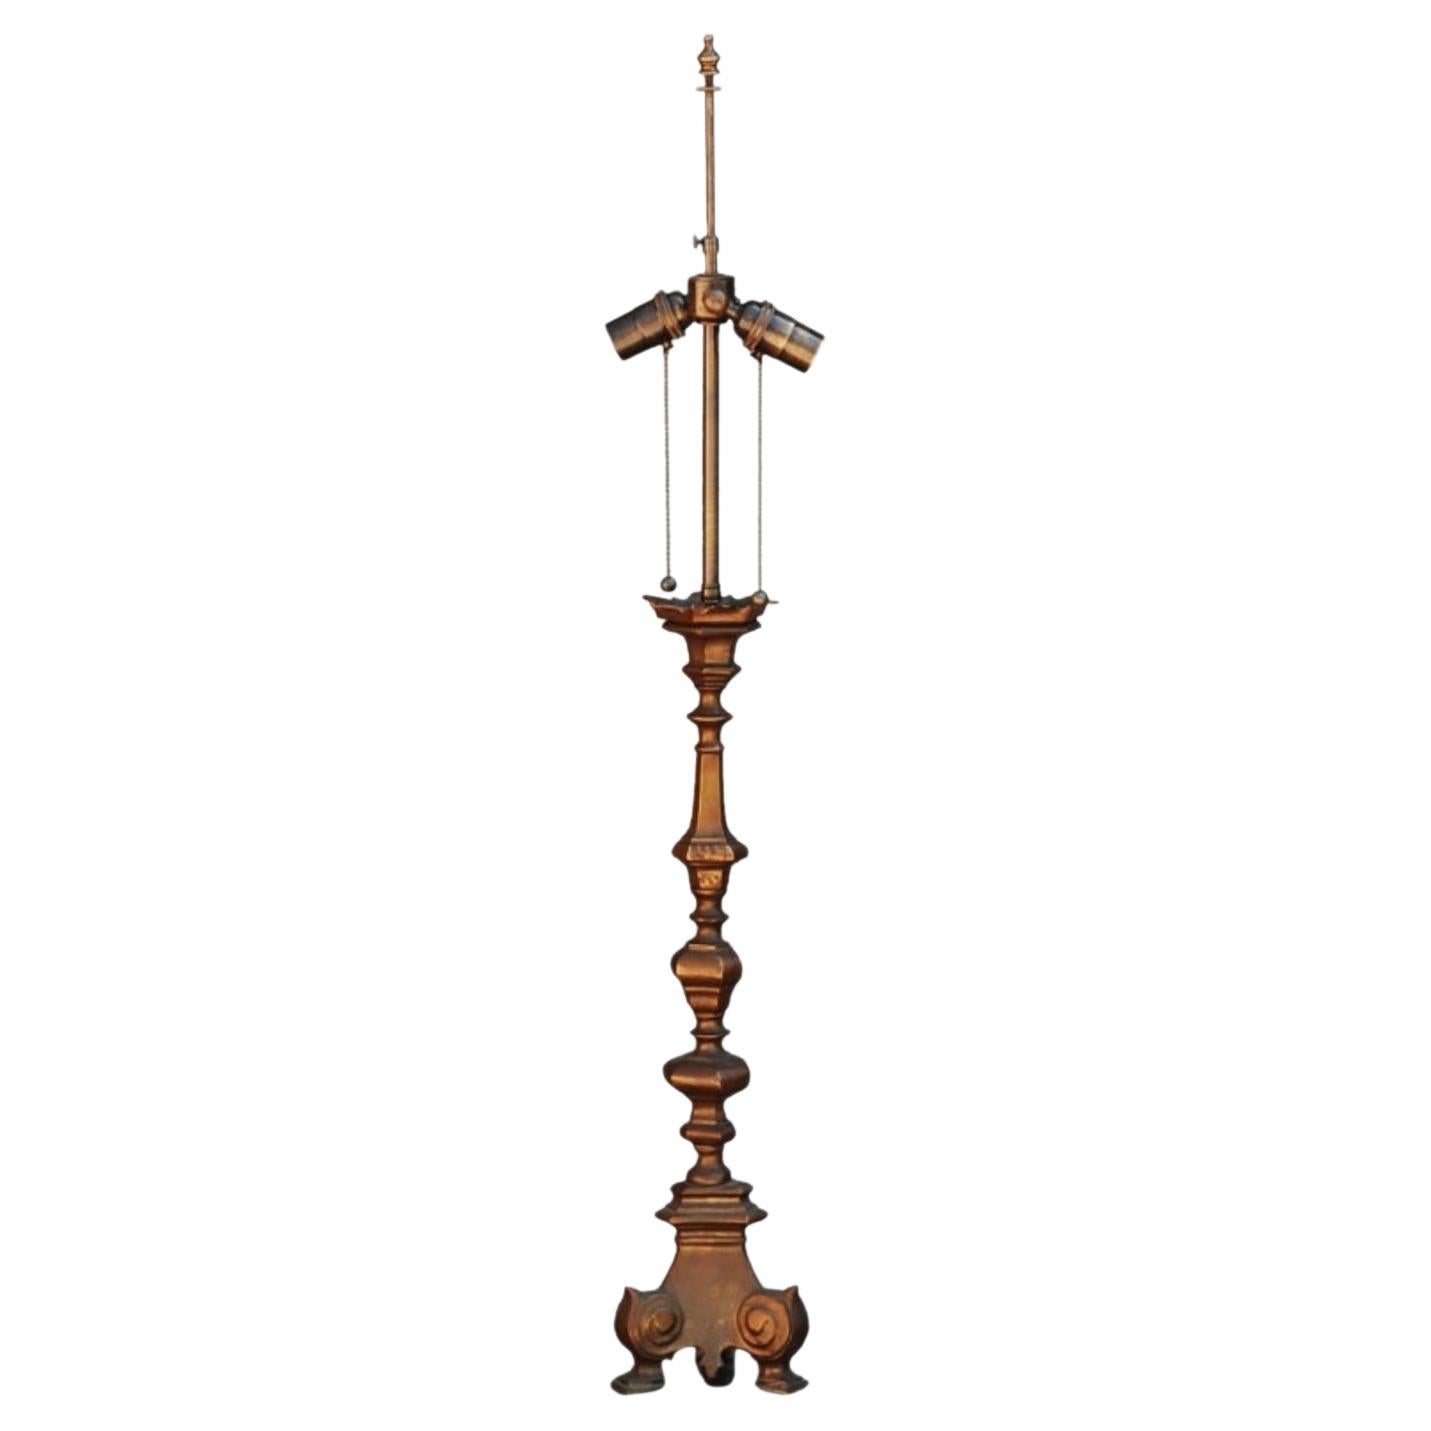 French Gilt Bronze Baroque Style Candlestick Lamp For Sale